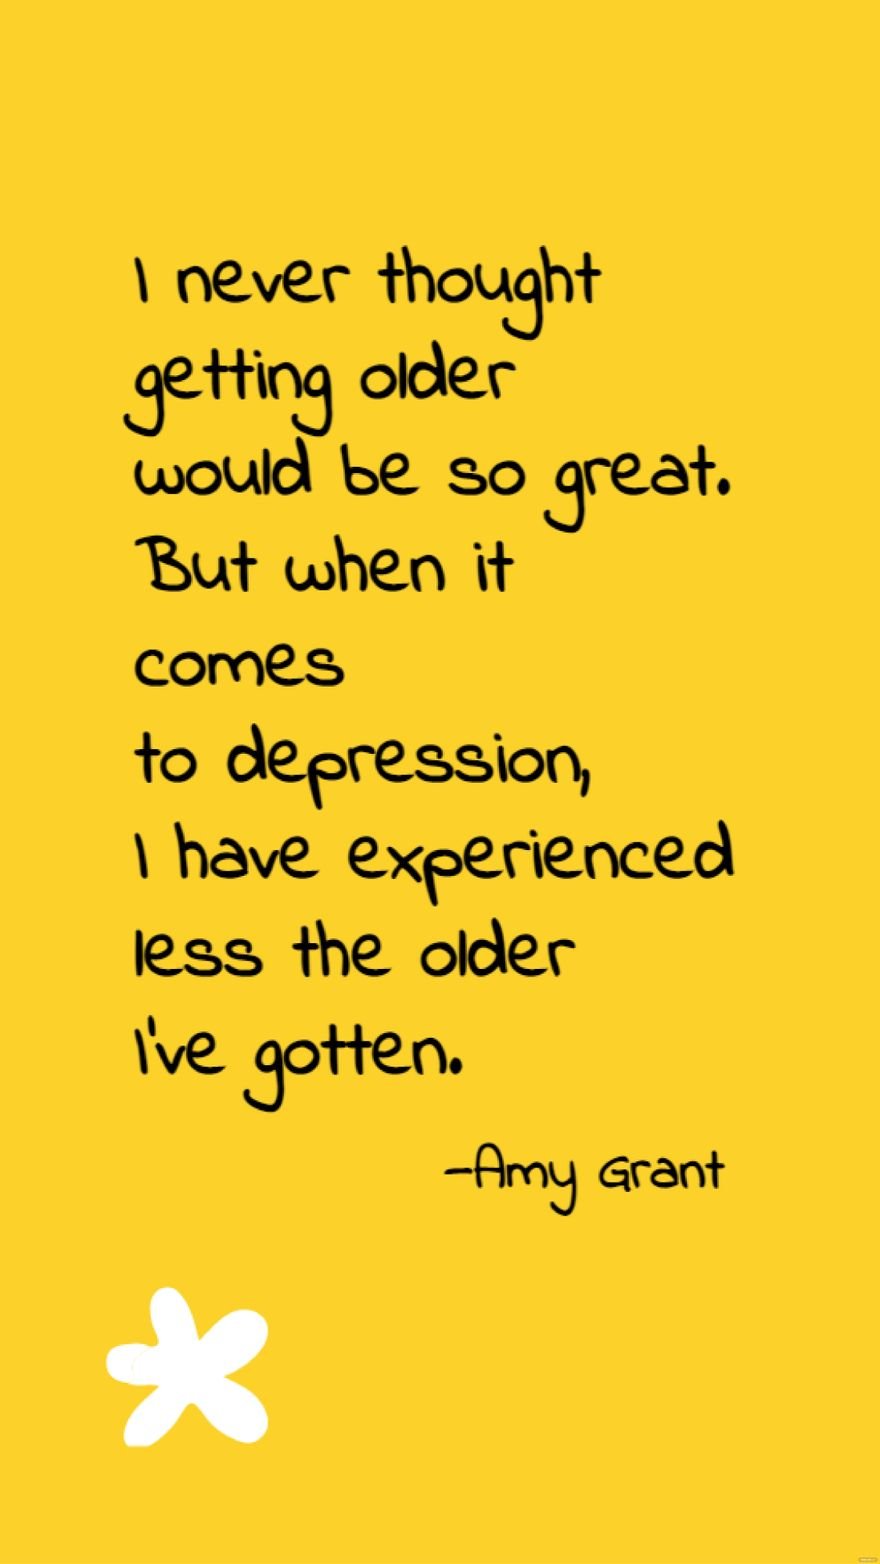 Amy Grant - I never thought getting older would be so great. But when it comes to depression, I have experienced less the older I've gotten.